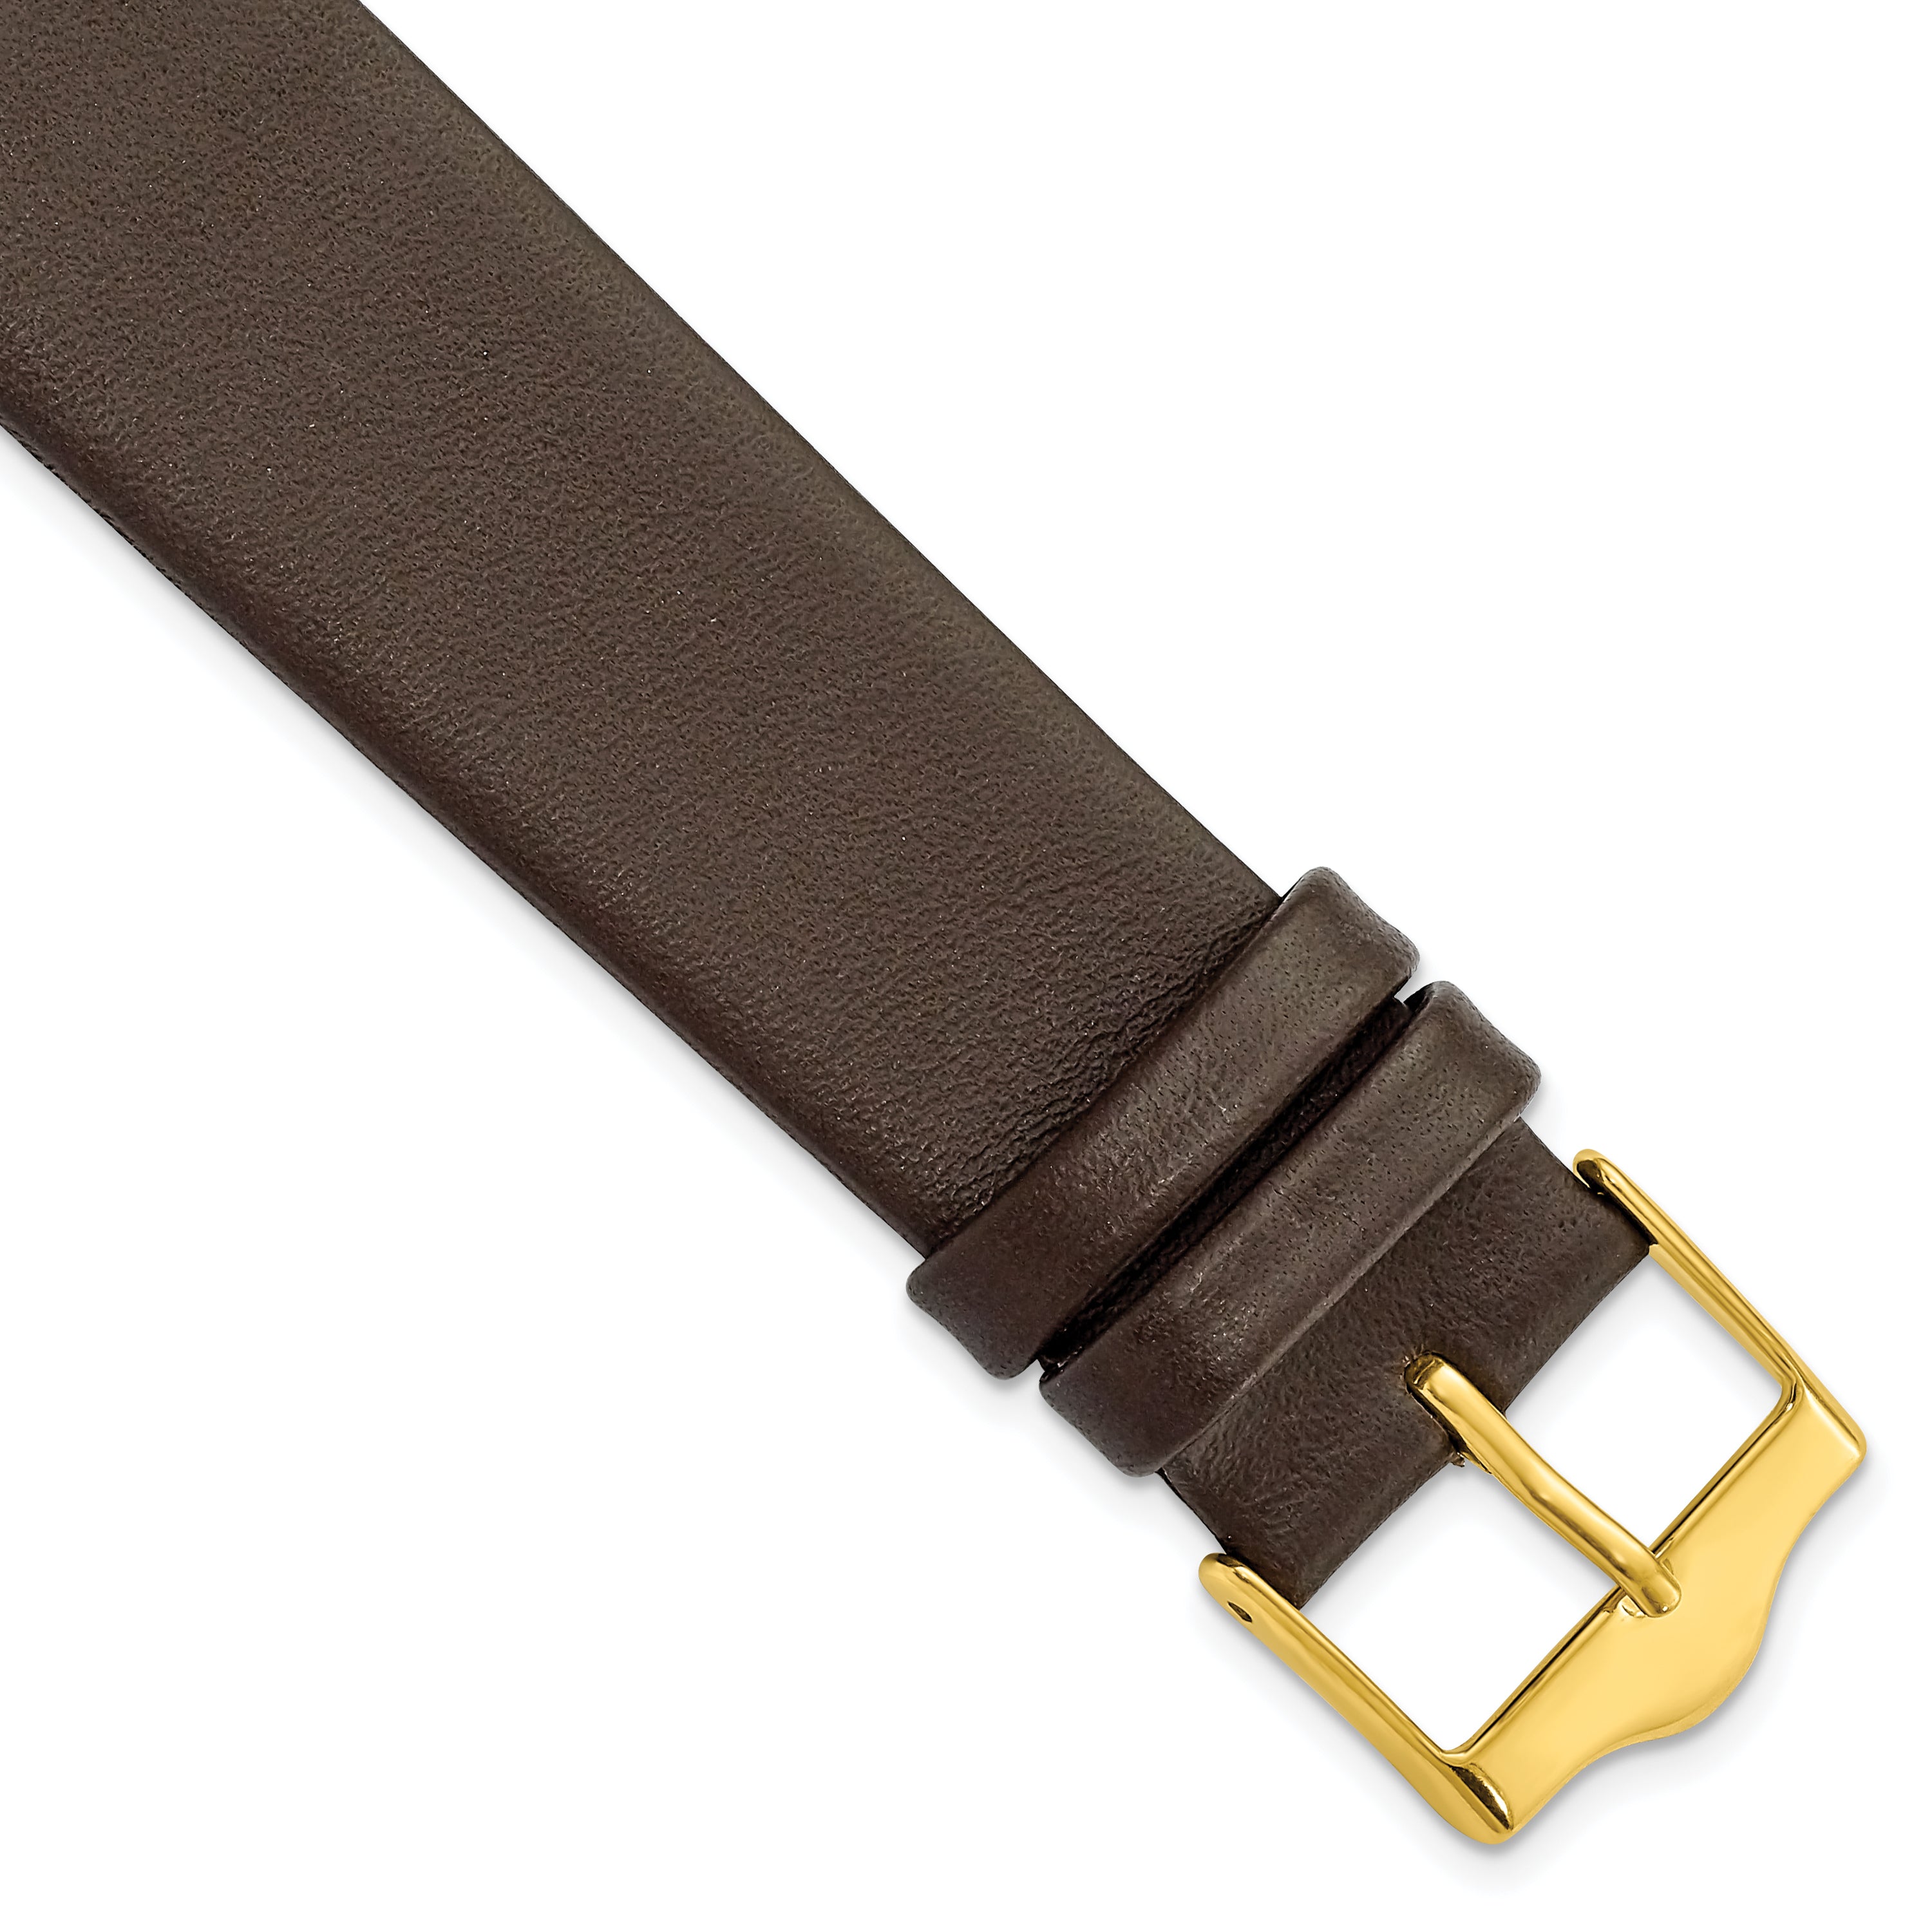 DeBeer 20mm Brown Smooth Flat Leather with Gold-tone Buckle 7.5 inch Watch Band